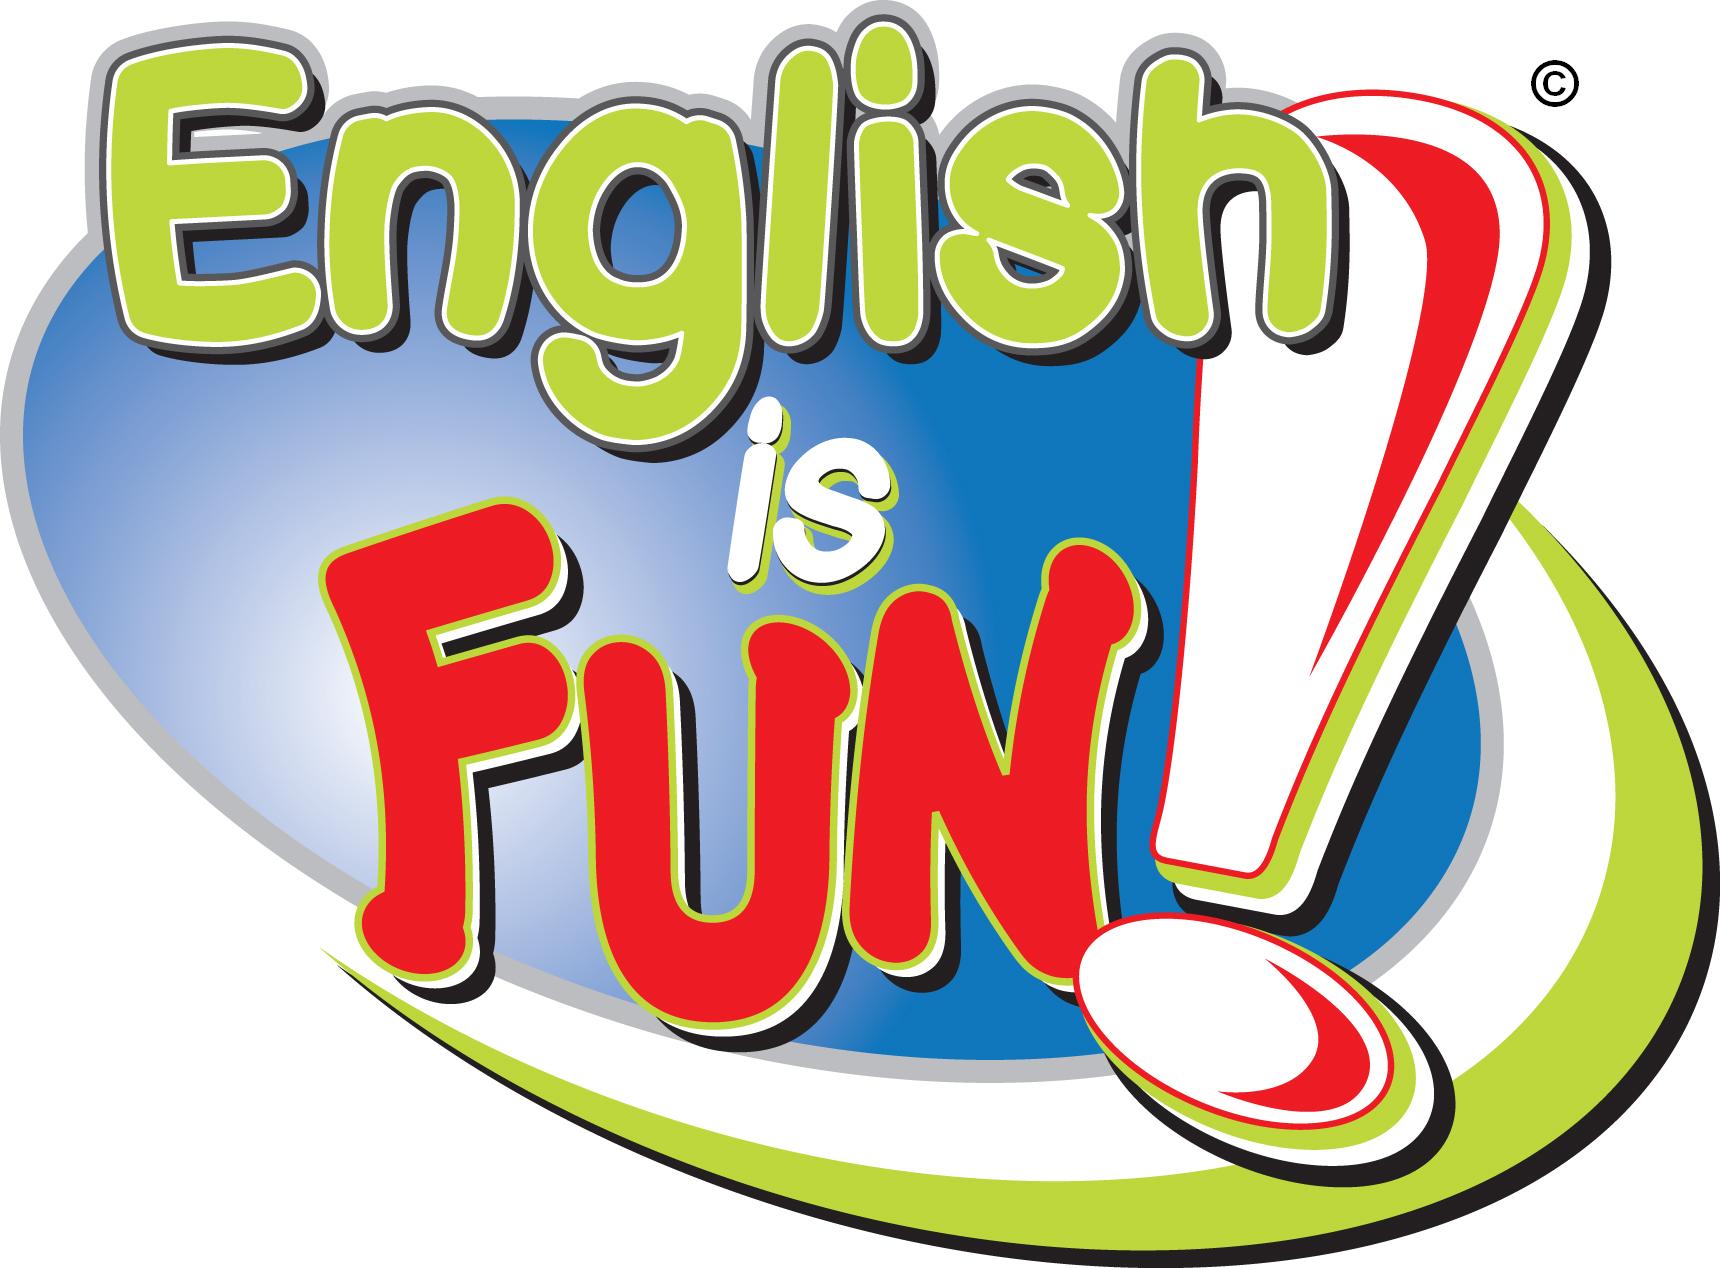 Let’s Have Fun with English